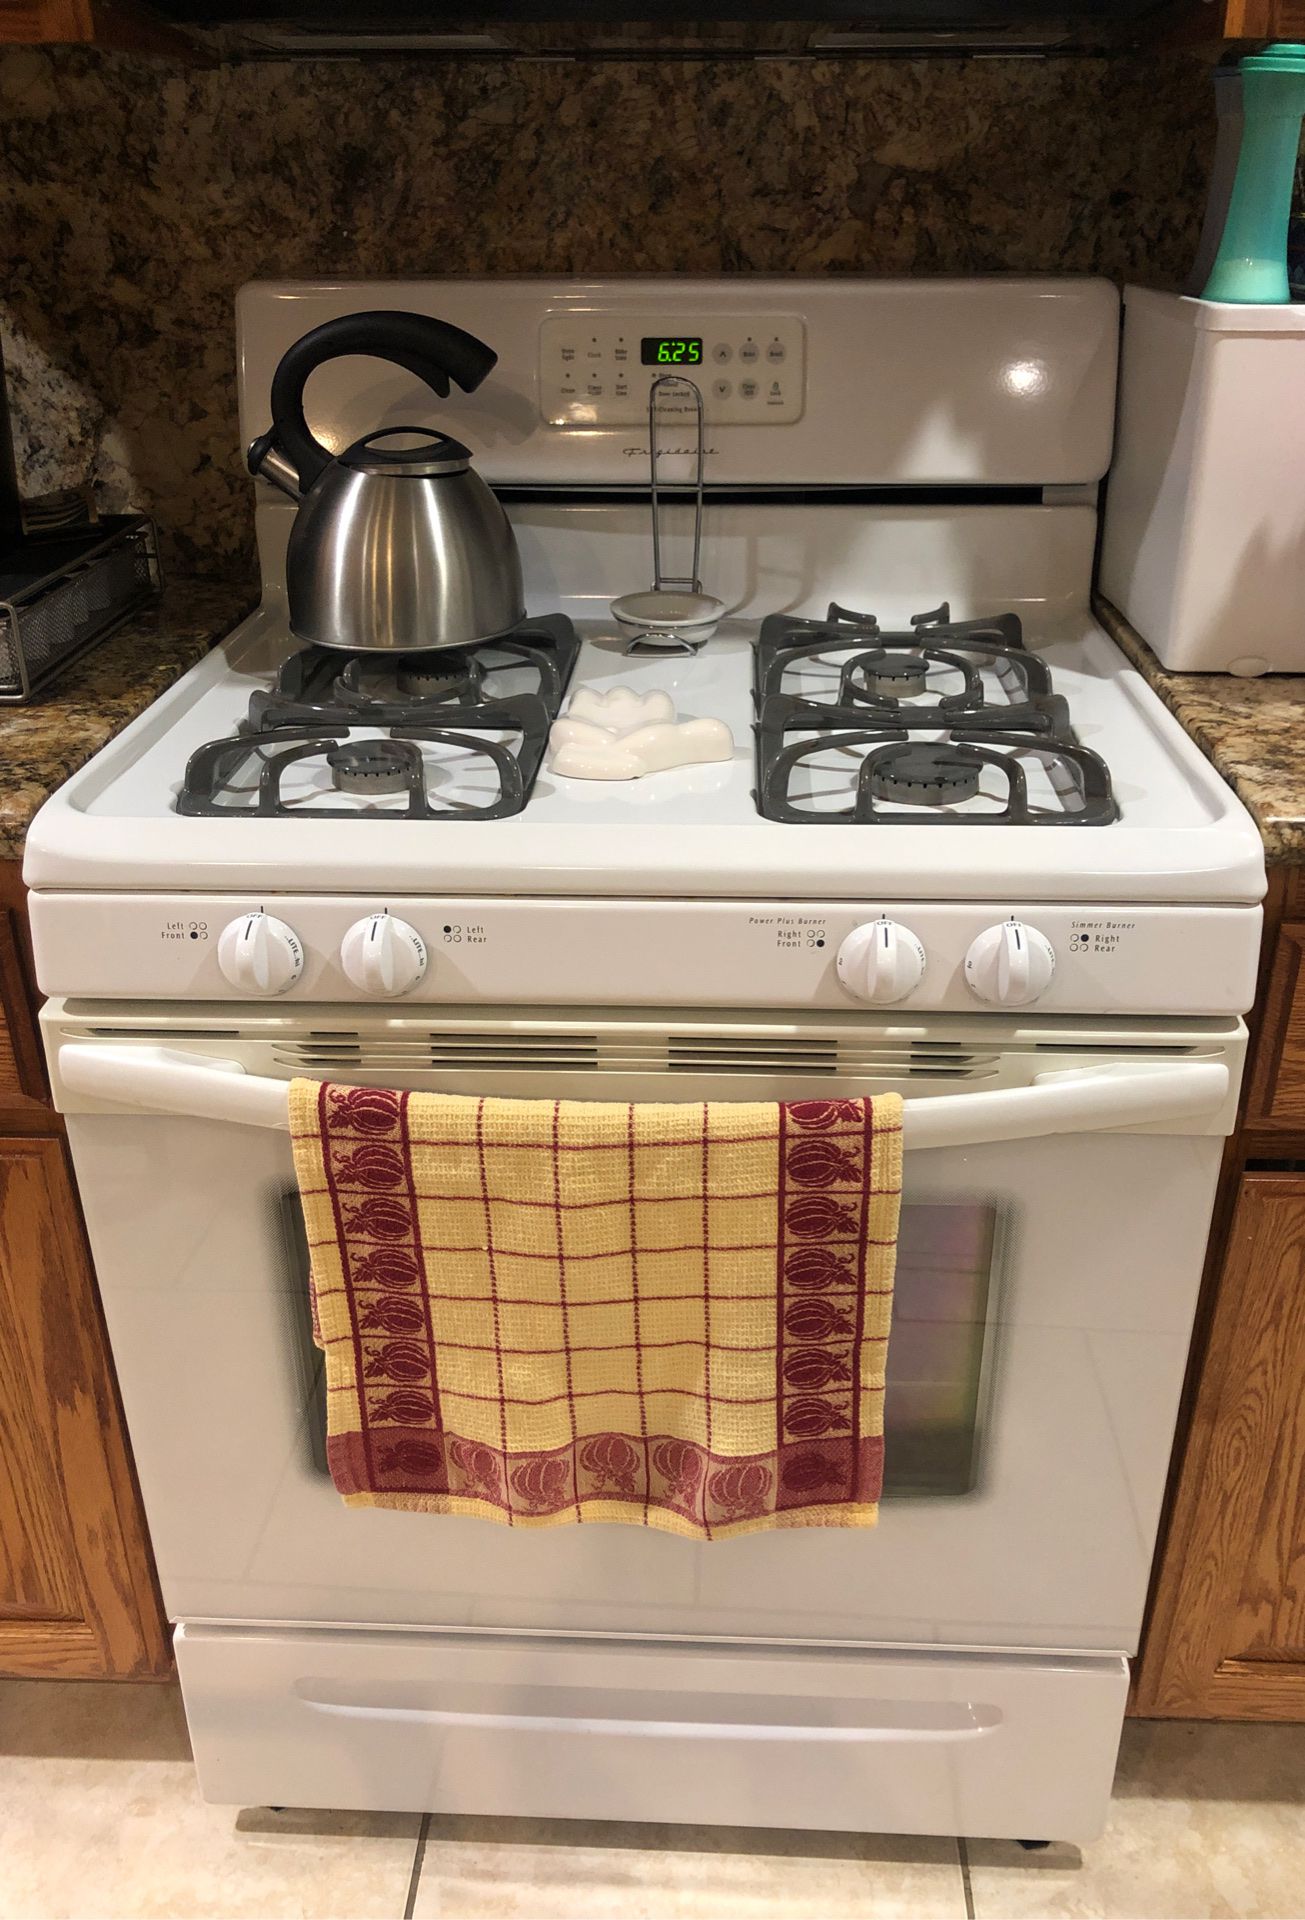 Stove, microwave and washer and dryer are sold.